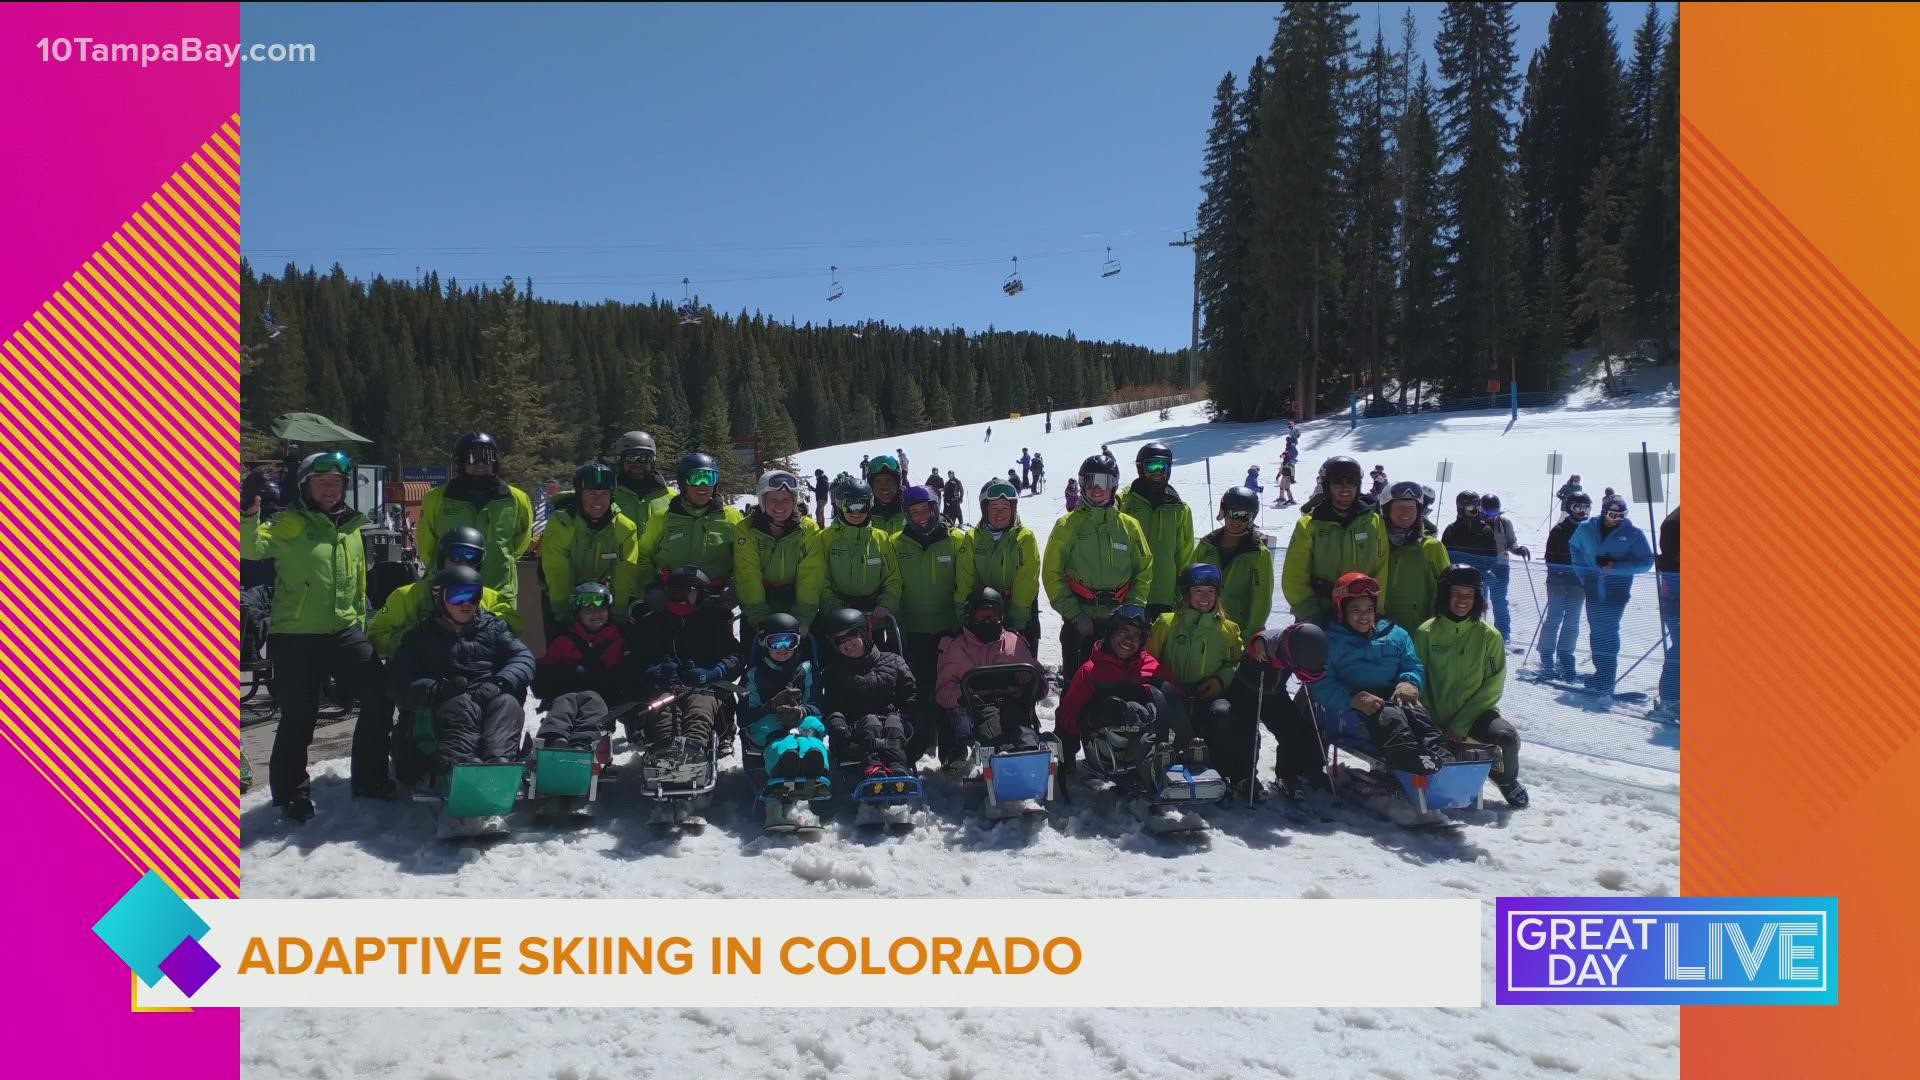 Wheelchairs 4 kids partners with southwest airlines to bring 18 kids adaptive snow skiing.